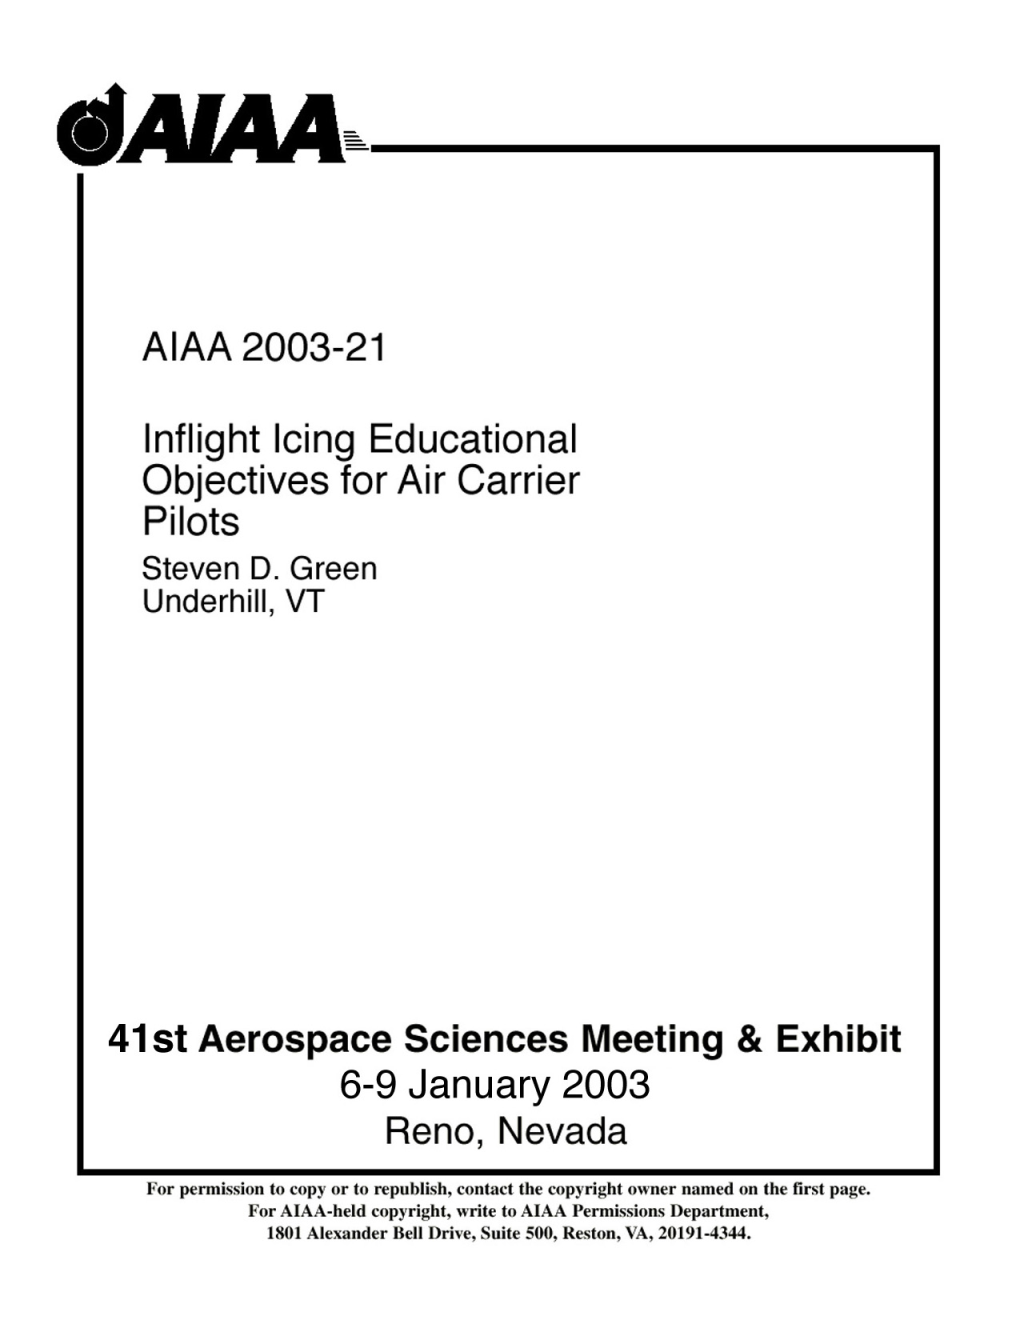 Inflight Icing Educational Objectives for Air Carrier Pilots